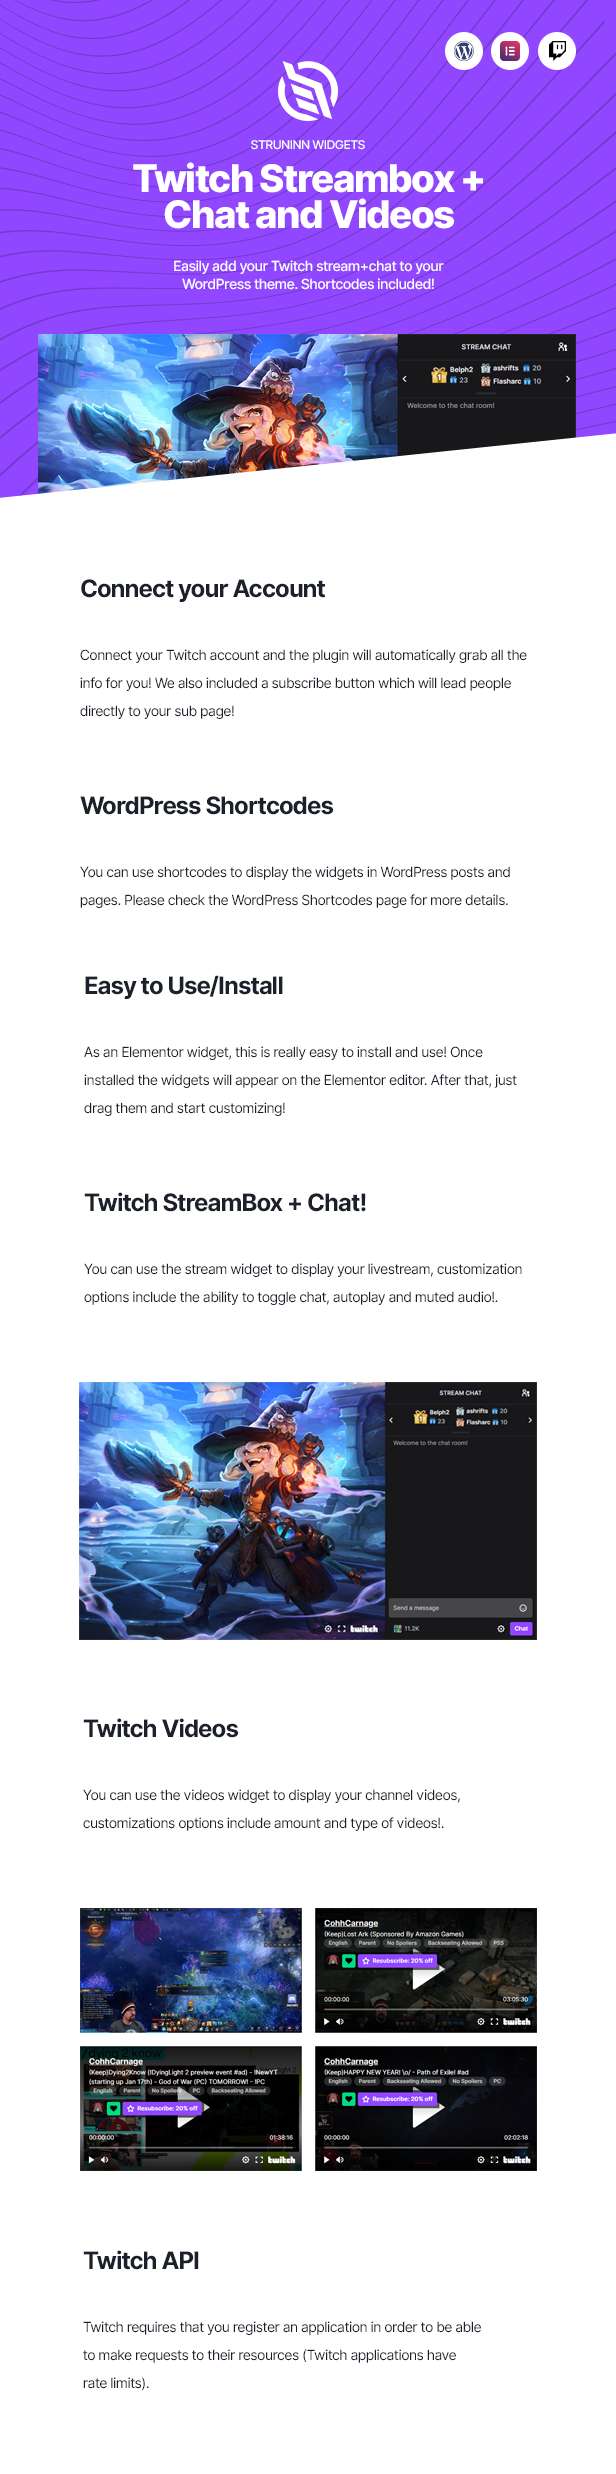 Struninn - Twitch Streambox with Chat and Videos - 7